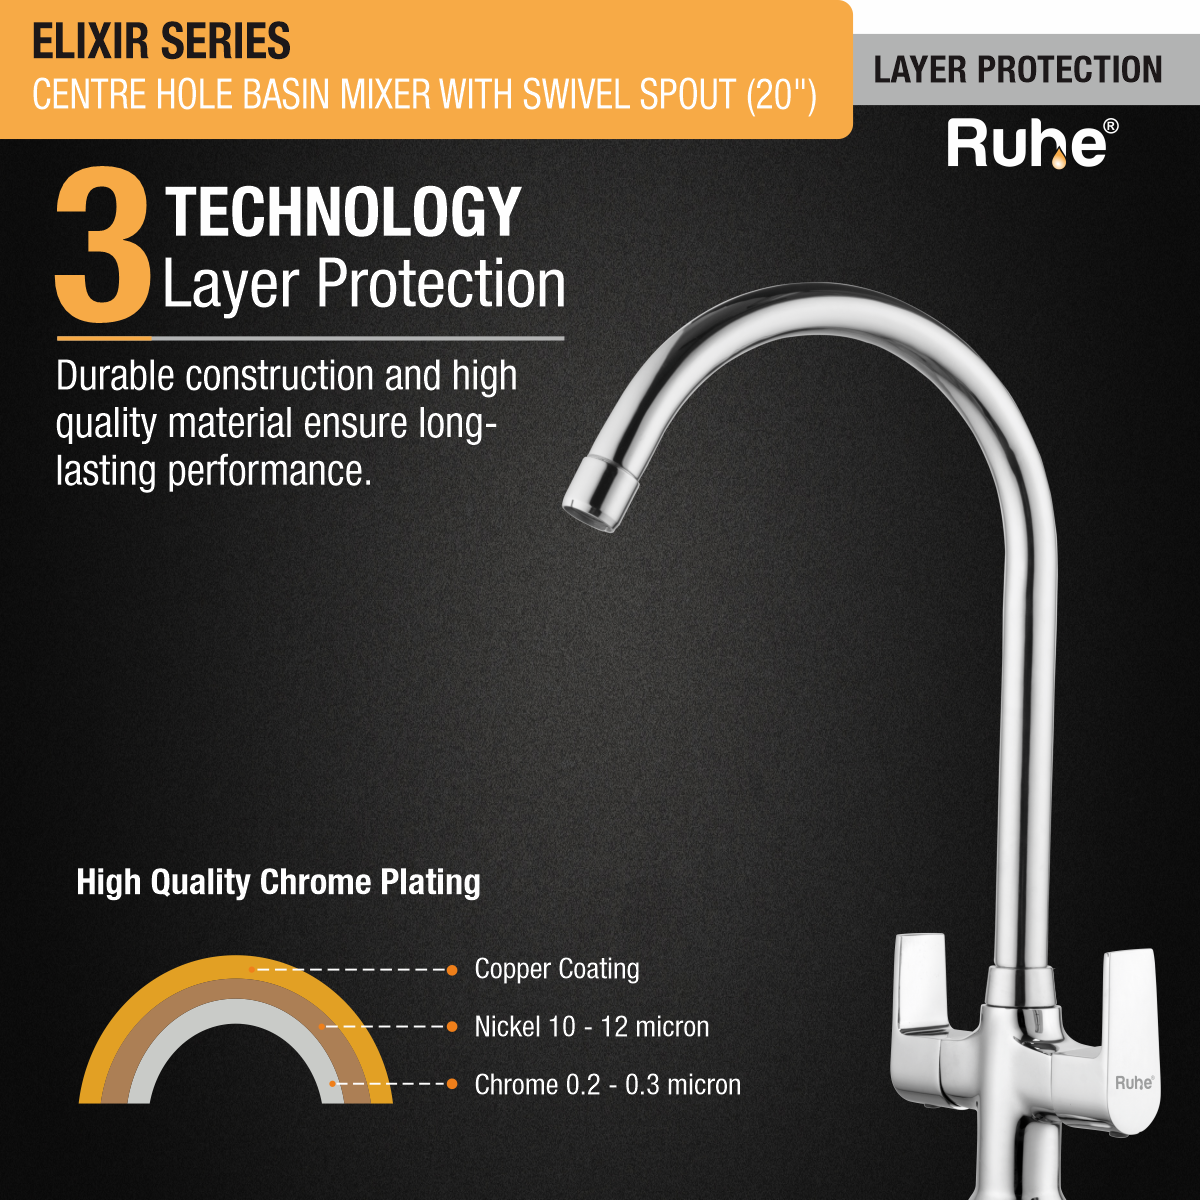 Elixir Centre Hole Basin Mixer with Large (20 inches) Round Swivel Spout Faucet 3 layer protection